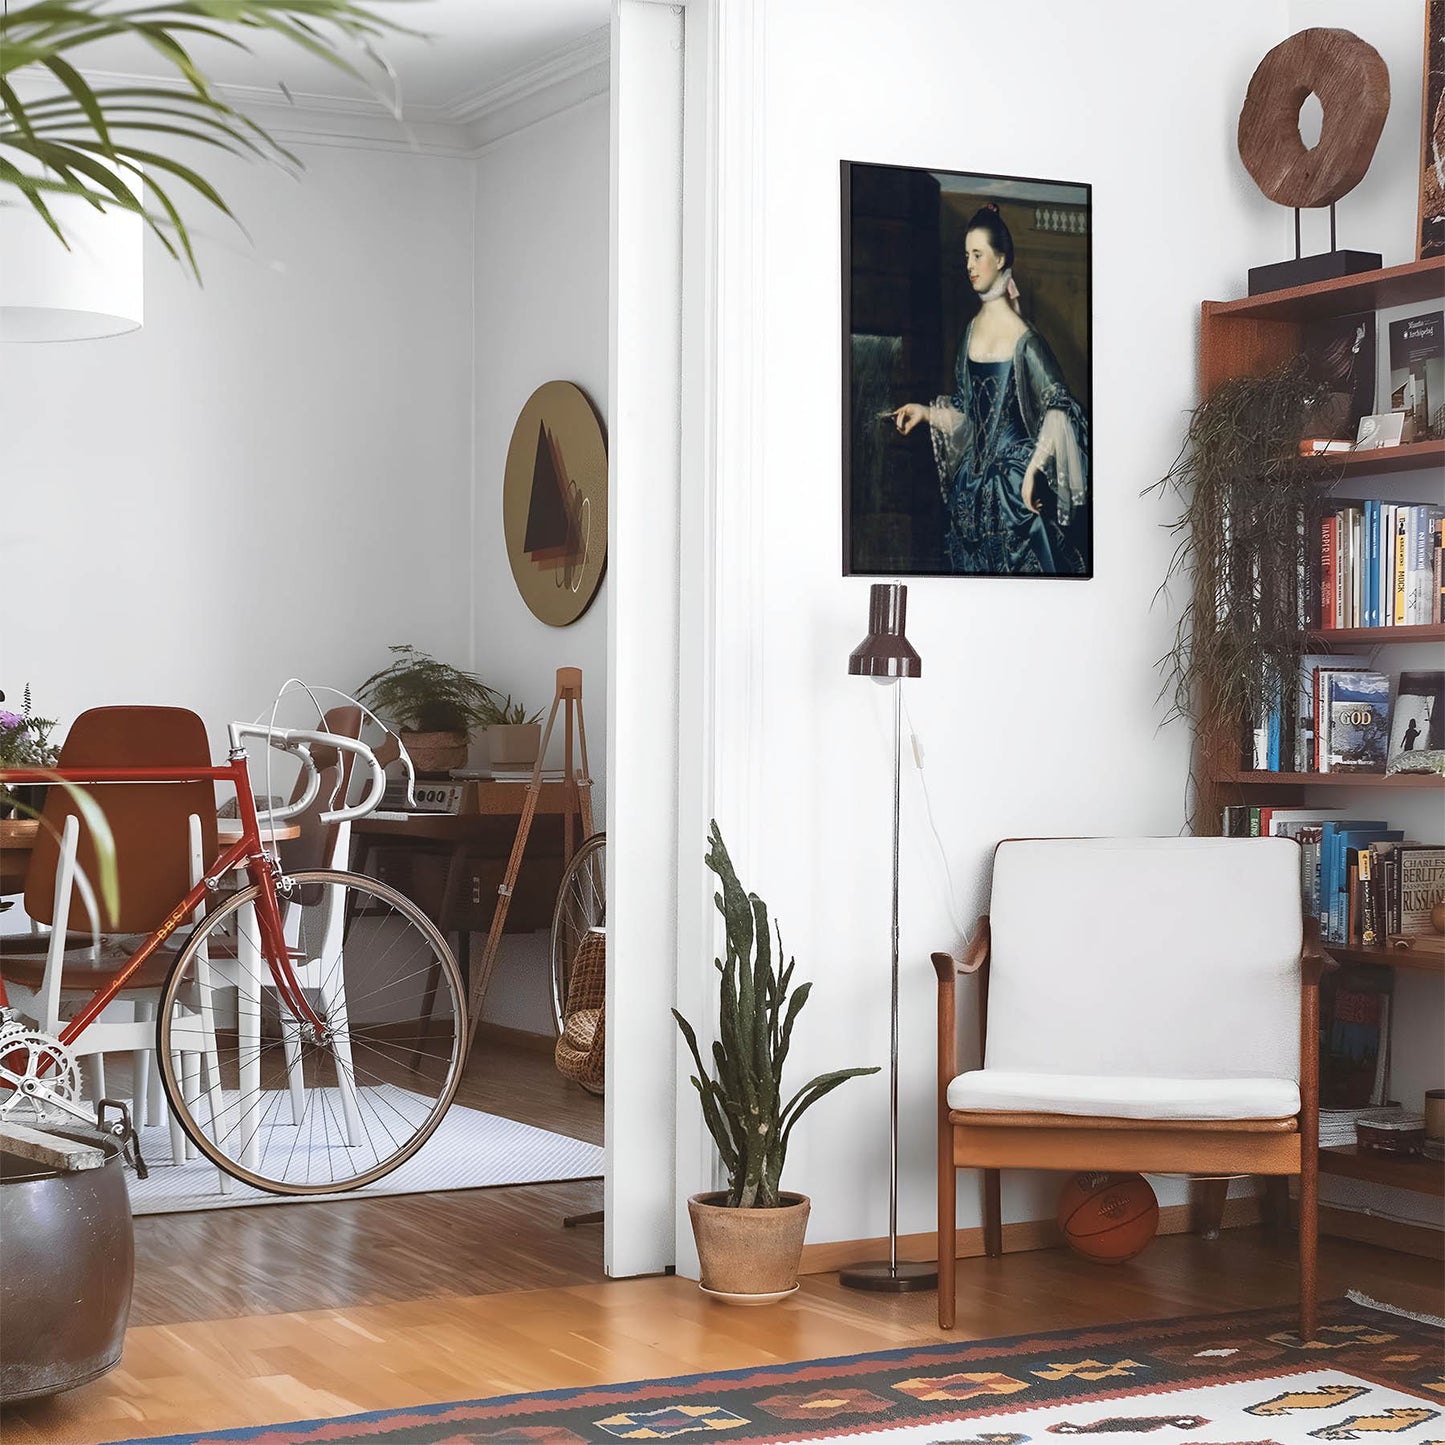 Eclectic living room with a road bike, bookshelf and house plants that features framed artwork of a Aesthetic Sapphire Blue Dress above a chair and lamp